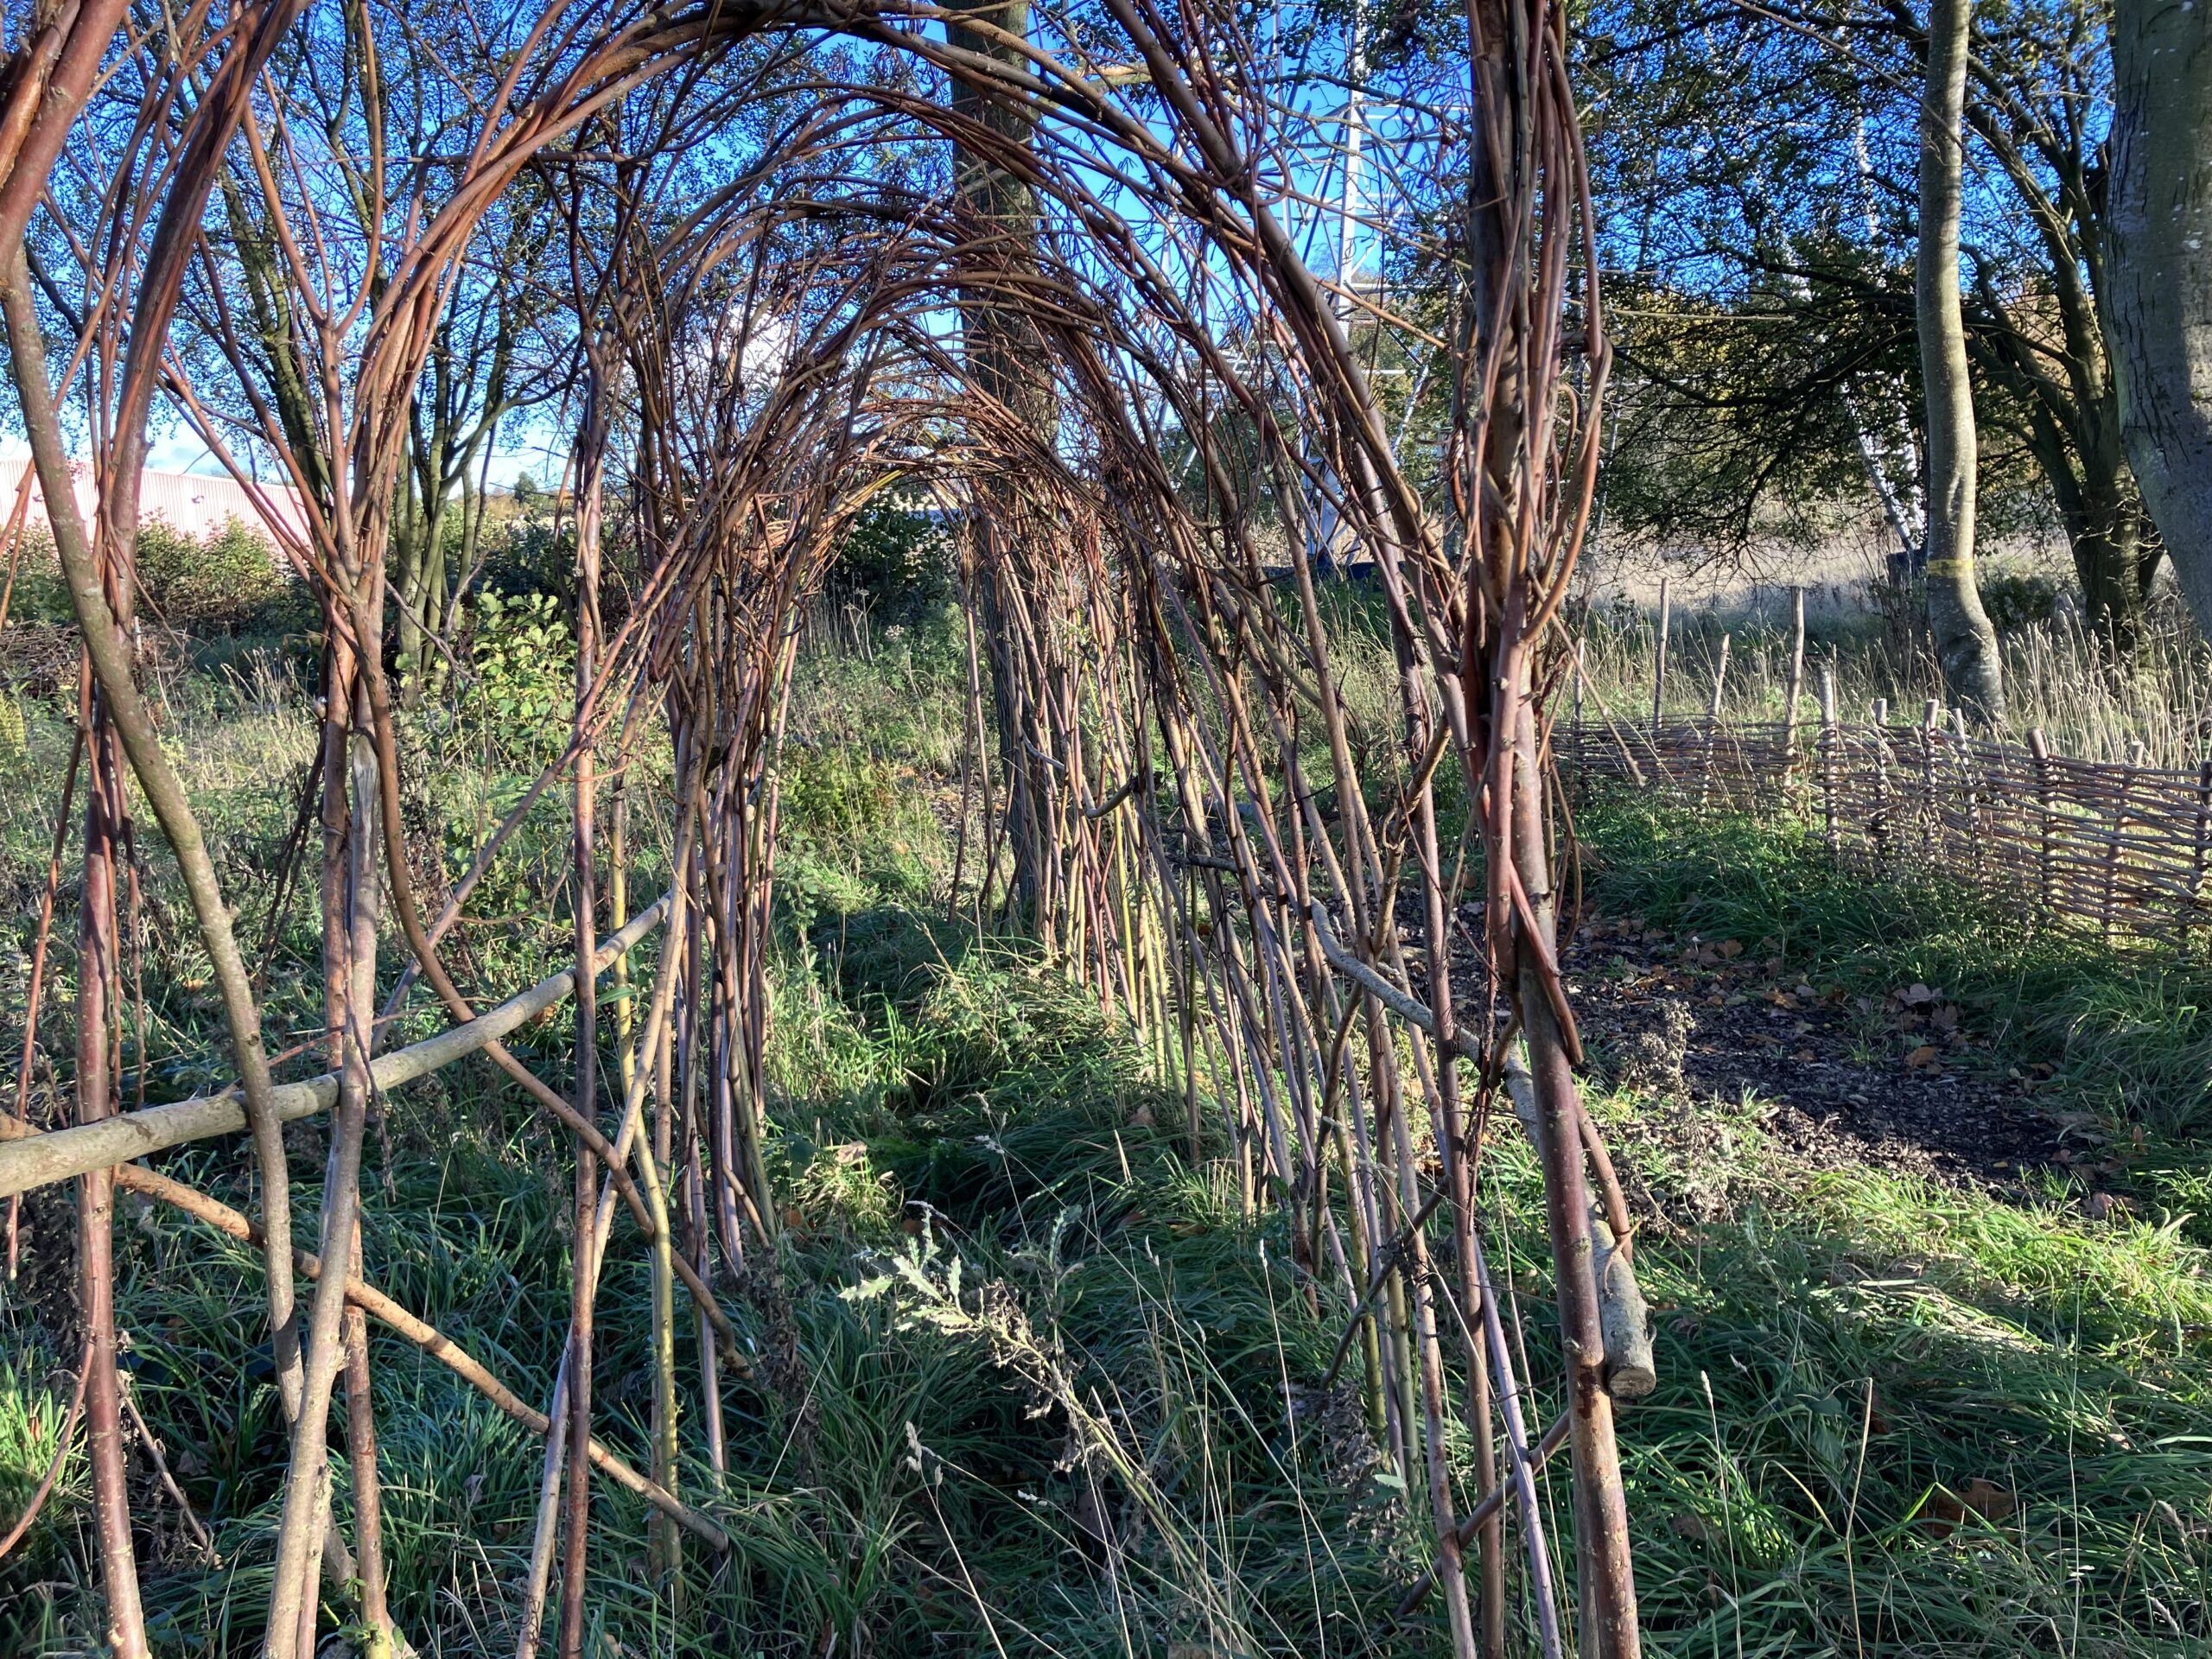 Photo of willow branches overgrown making an archway